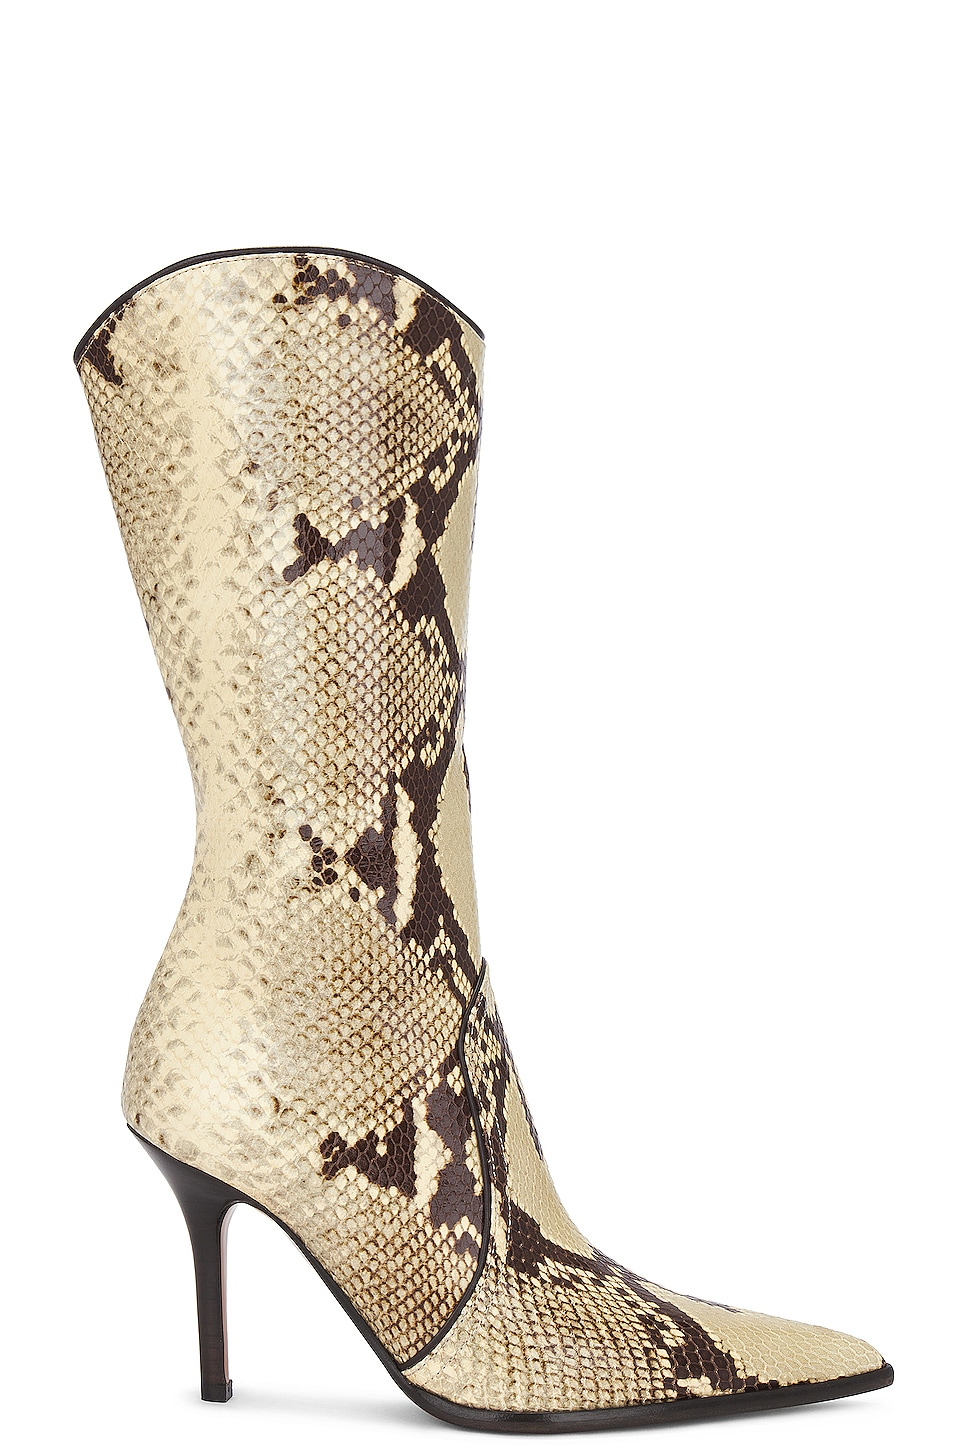 Image 1 of Paris Texas Ashley Midcalf 95 Boot in Pale Yellow